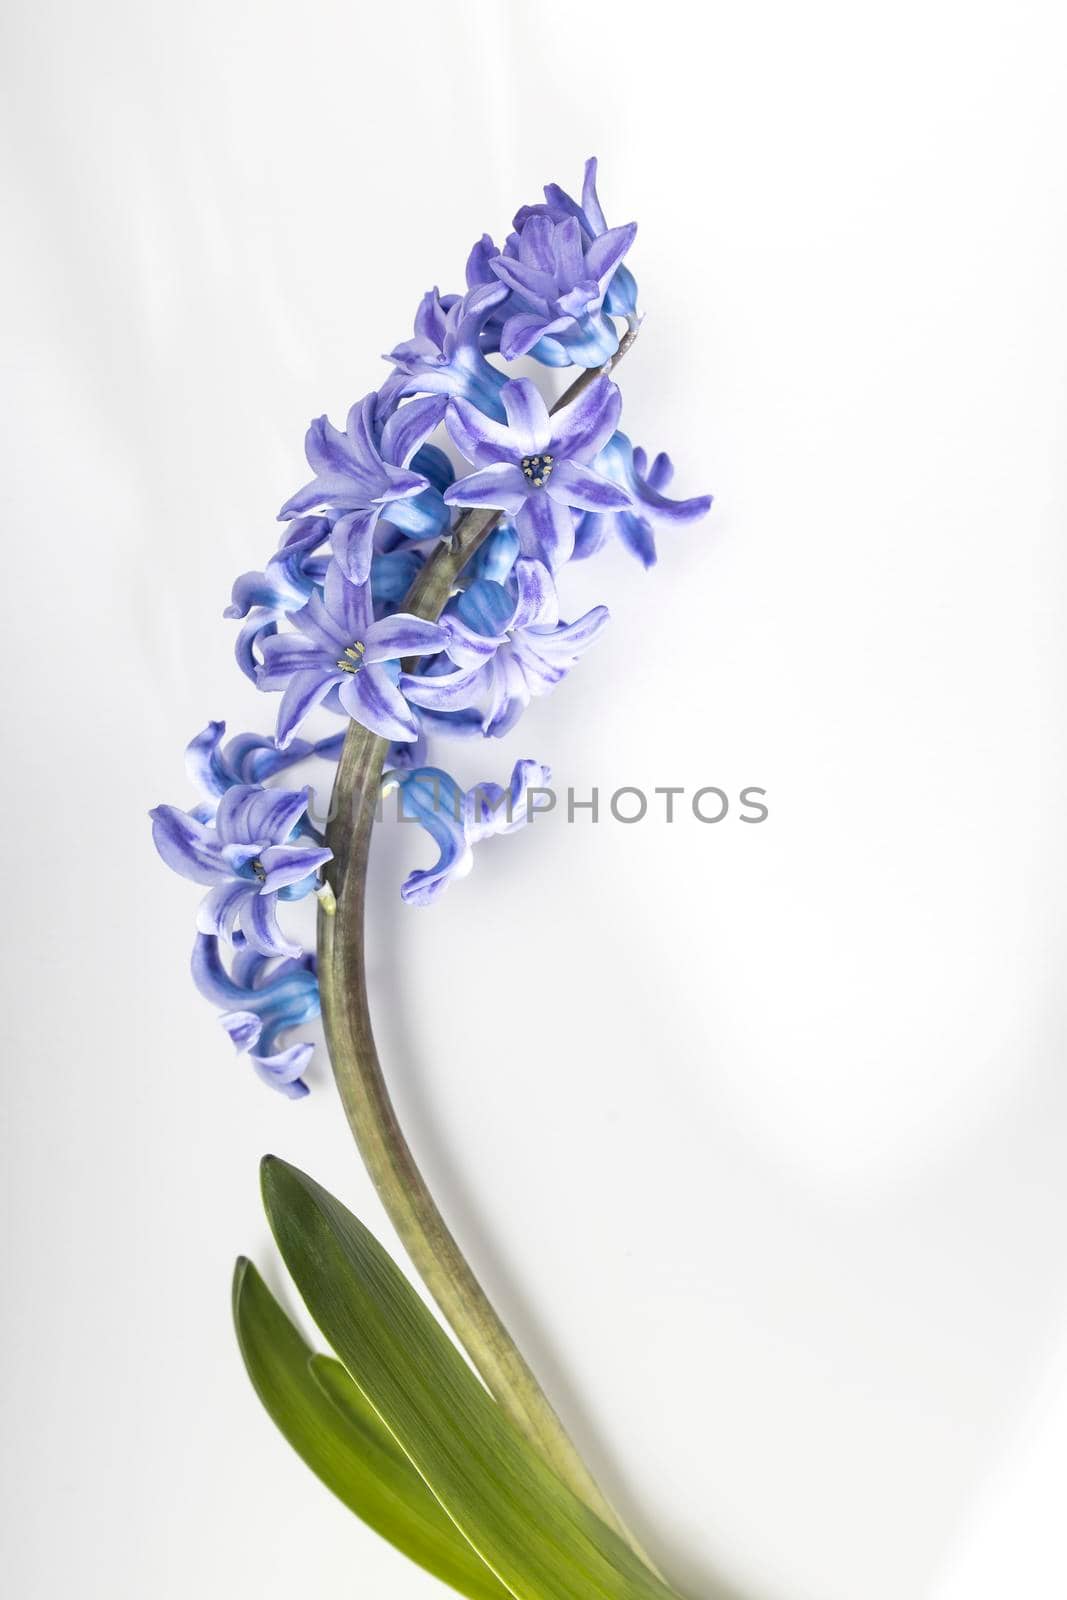 hyacinth plant with blue flowers, bulbs and roots on a white background. Copy space